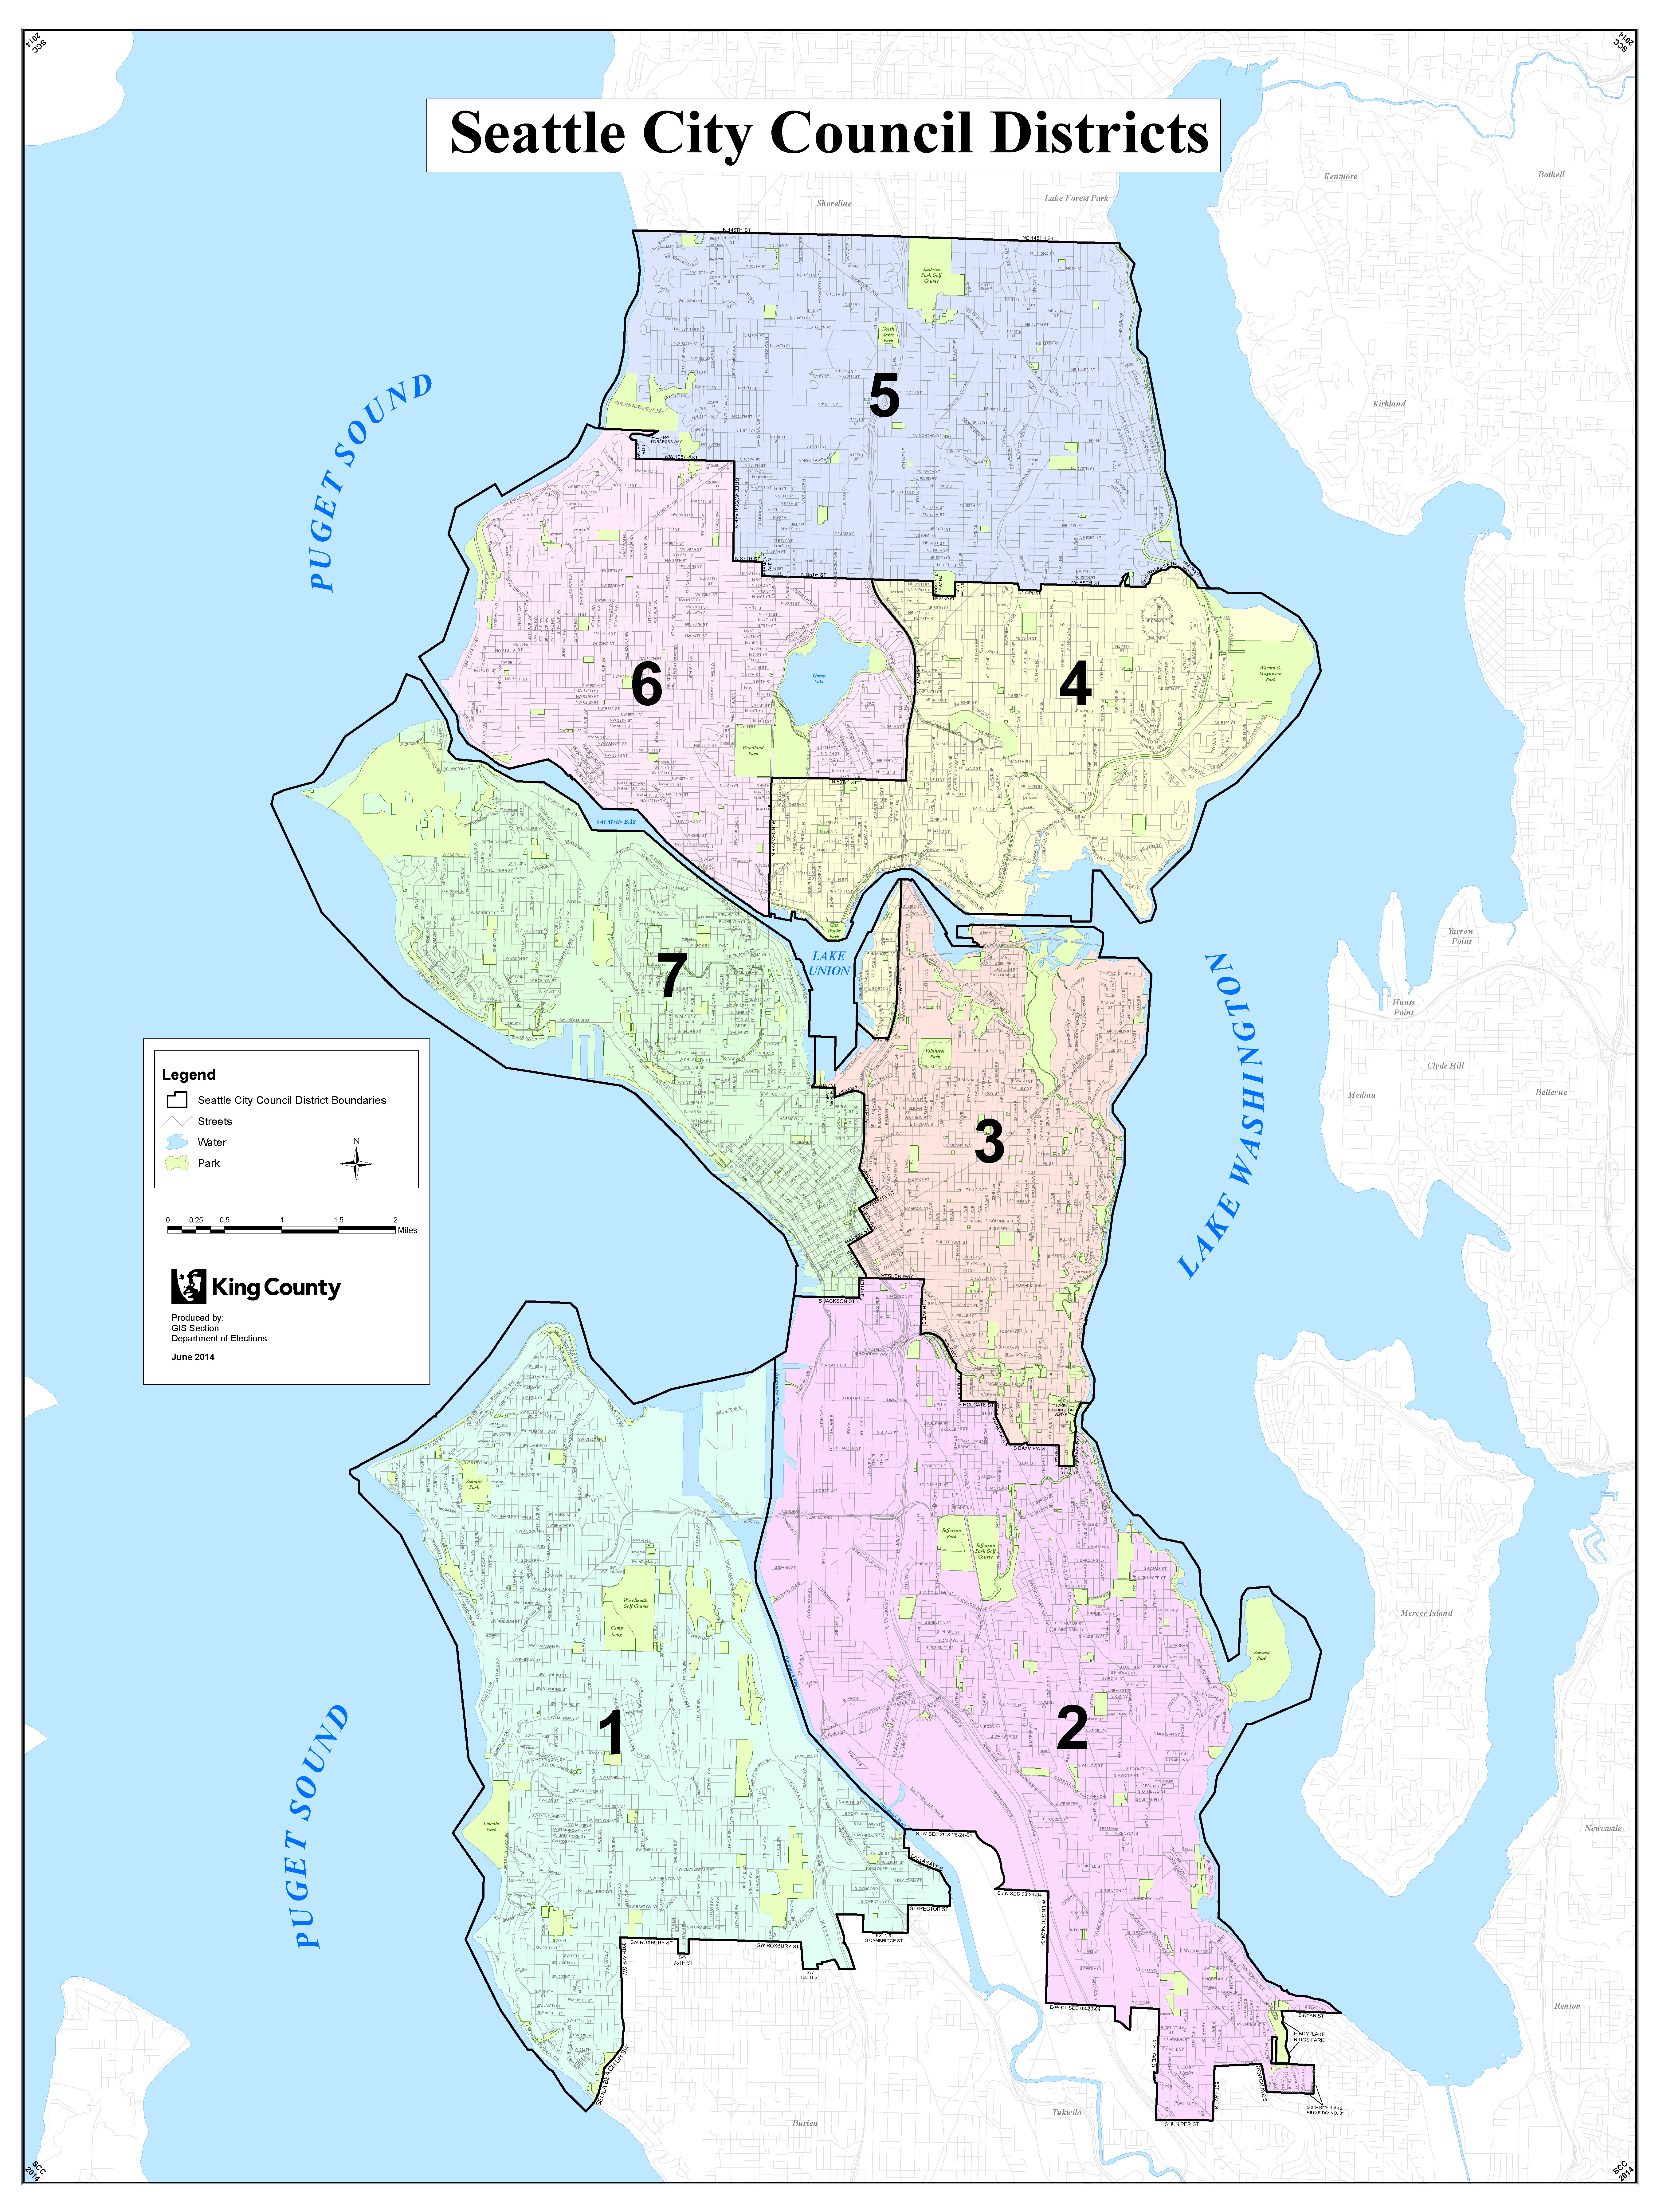 A map shows the district boundaries: District 1 is West Seattle, District 2 is Southeast Seattle, District 3 is the Central Area, District 4 is Northeast Seattle, District 5 is North Seattle, District 6 is Northwest Seattle, and District 7 is Magnolia, Queen Anne and the downtown core.